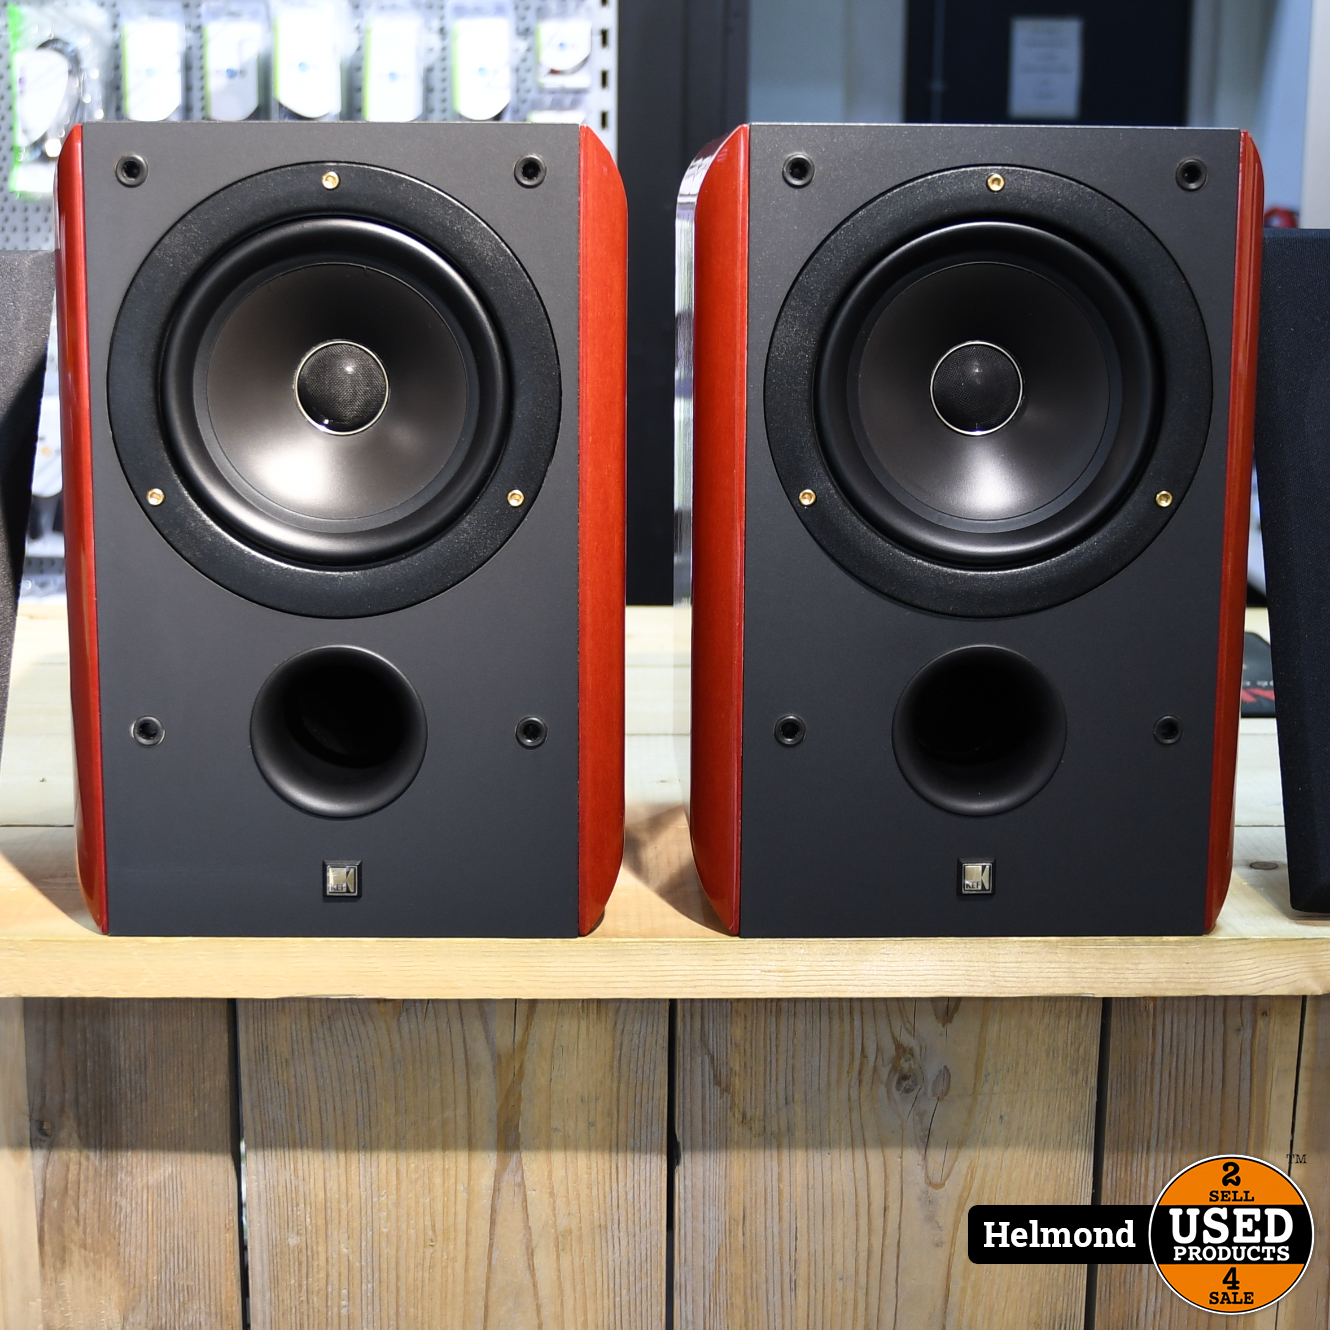 KEF Monitor SP3254 Speakers | In Nette - Used Products Helmond